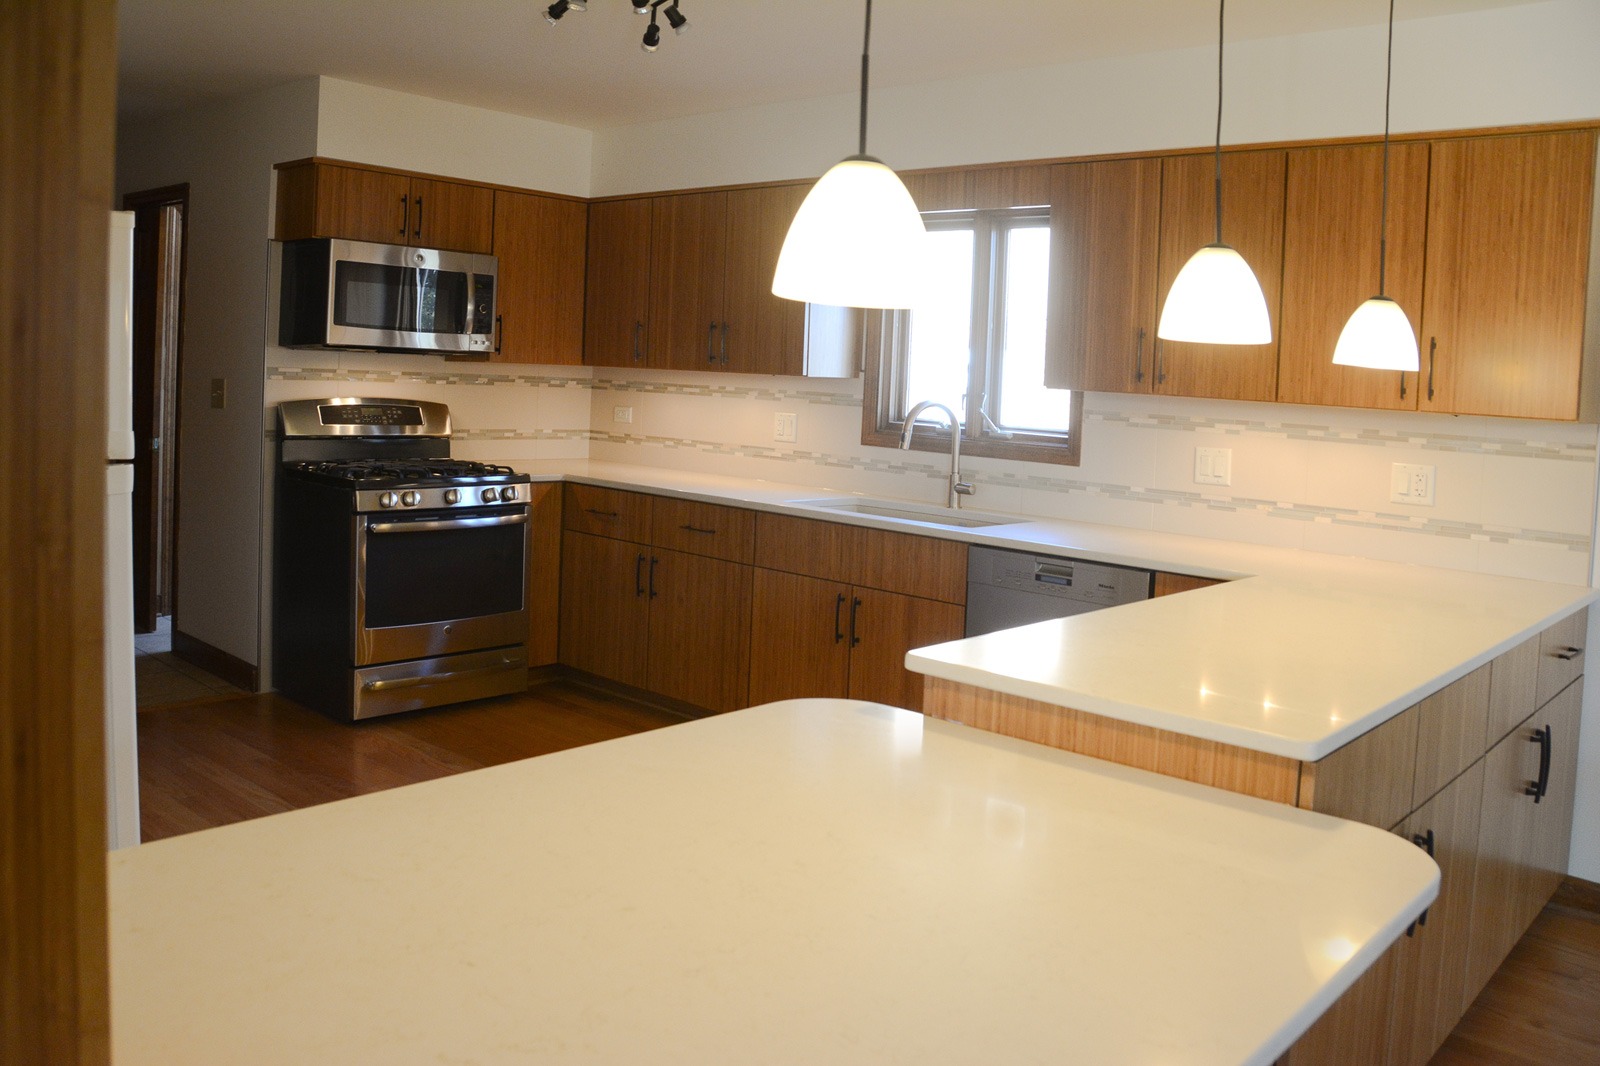 Kitchen remodeling in Naperville, IL. Caramelized bamboo grain complements a modern home.